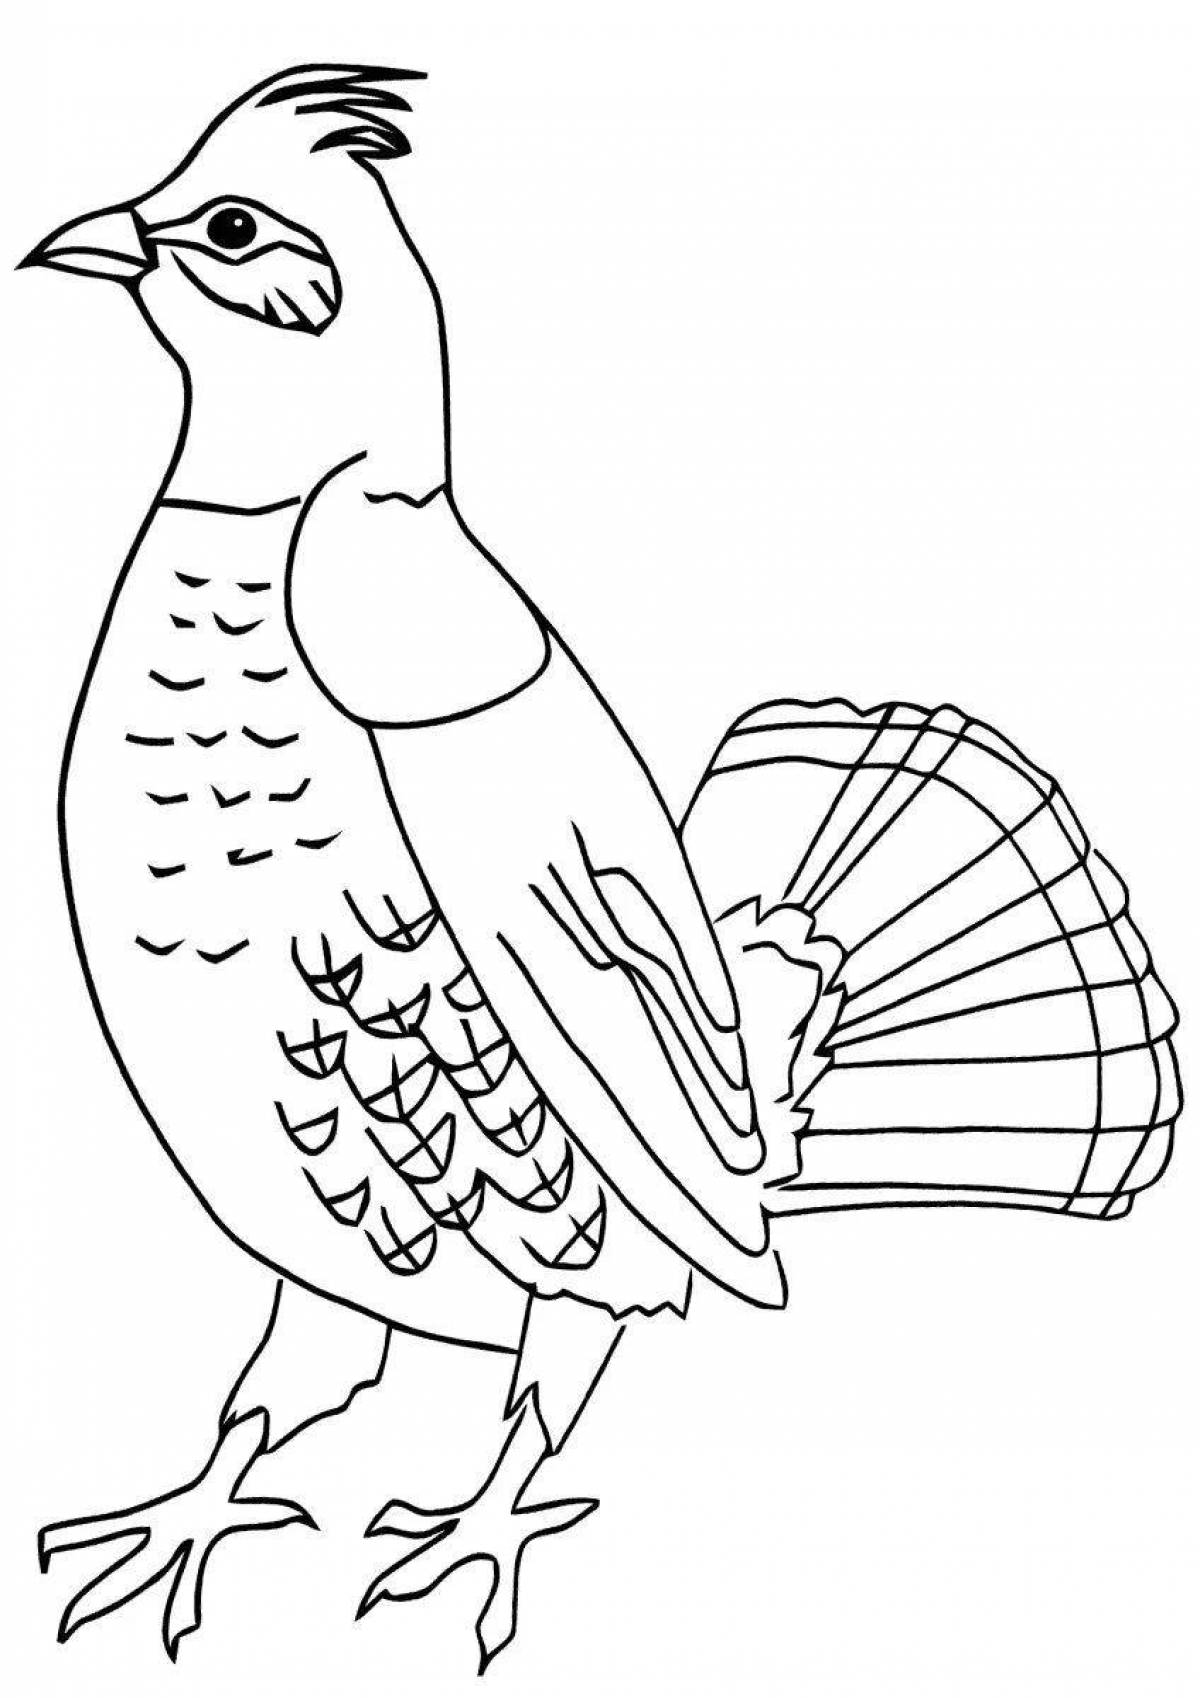 Coloring book beckoning black grouse